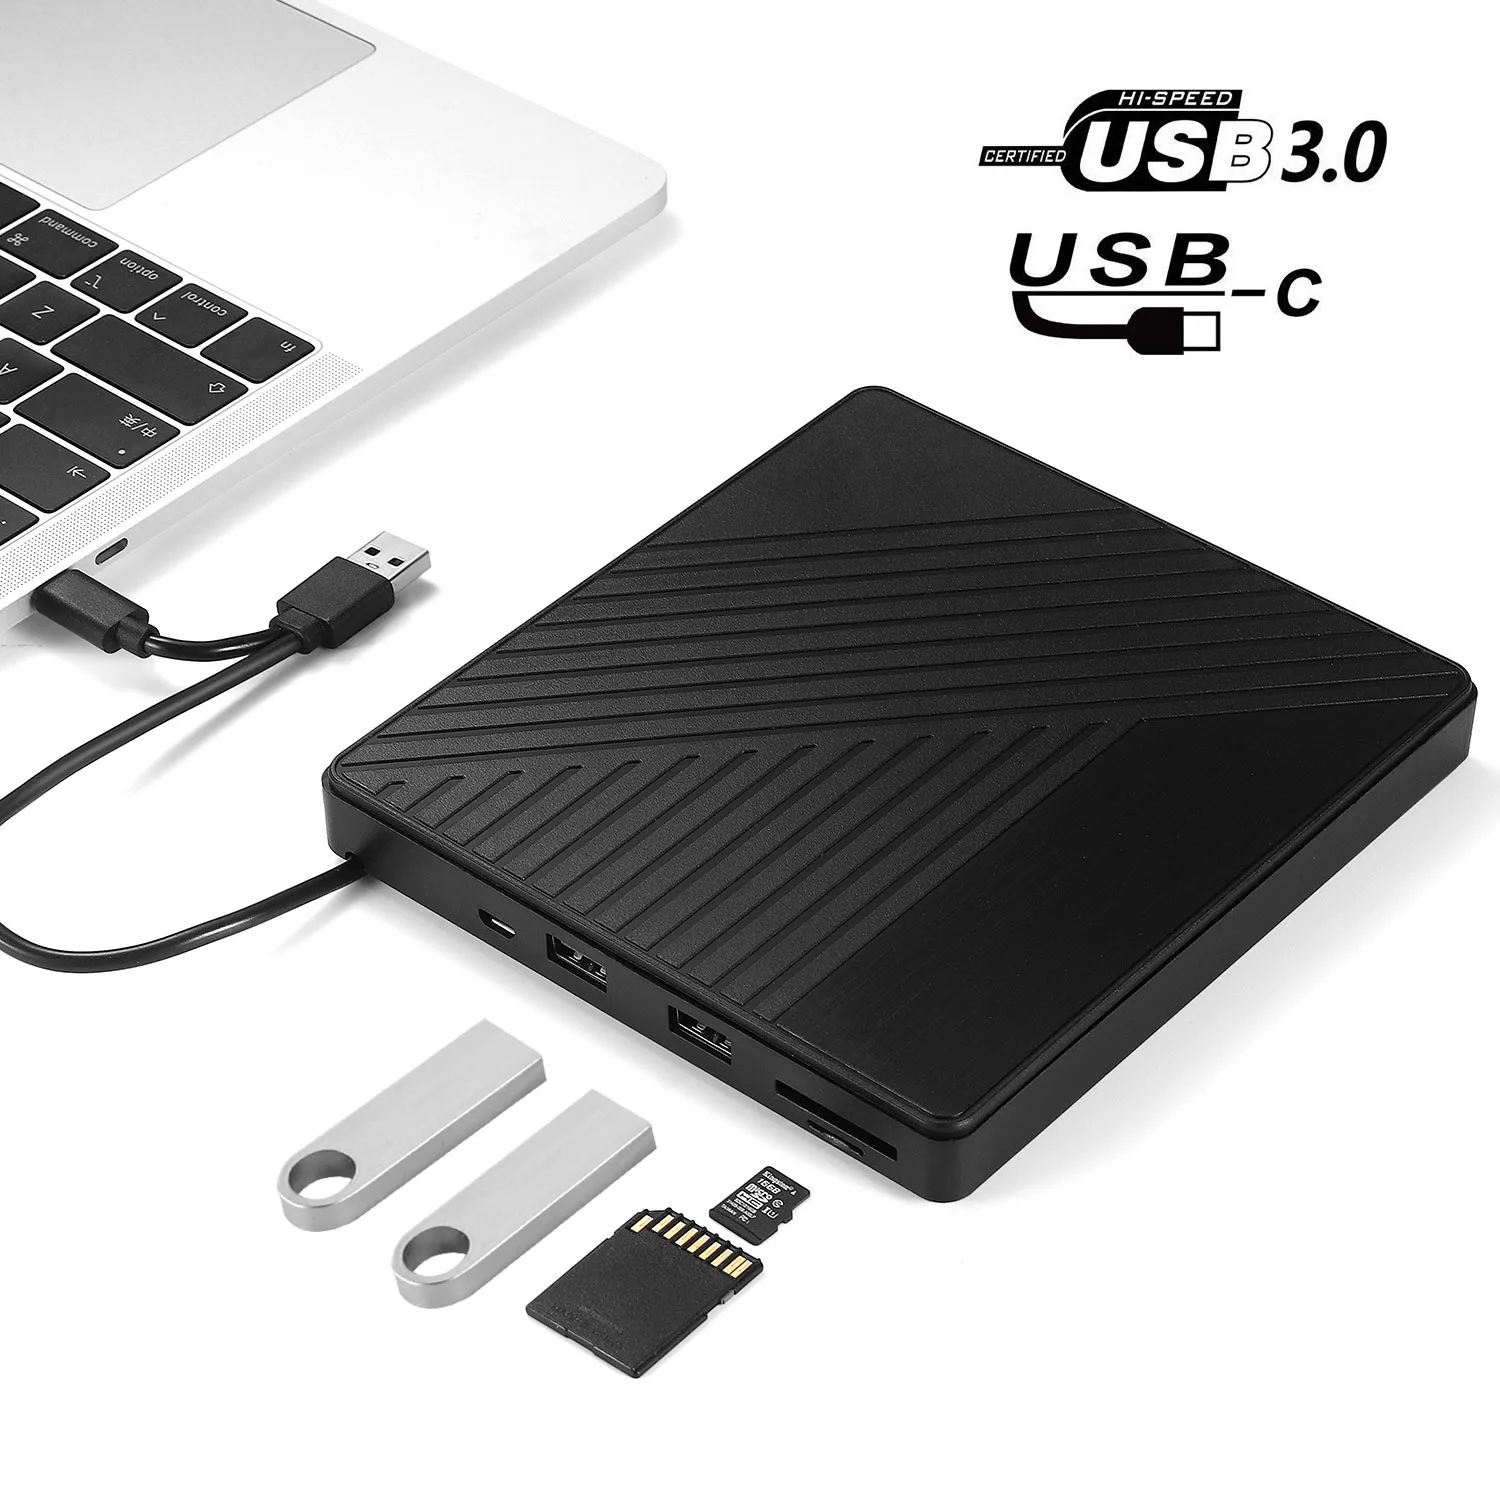 moeilijk catalogus Dierentuin s nachts External Cd Dvd Drive For Laptop Dvd Player Cd Burner Type C Usb 3.0 With  2usb Ports Sd Tf Card Slot - Buy External Dvd Drive Usb 3.0 Portable Cd/dvd+/-rw  Drive/dvd Player